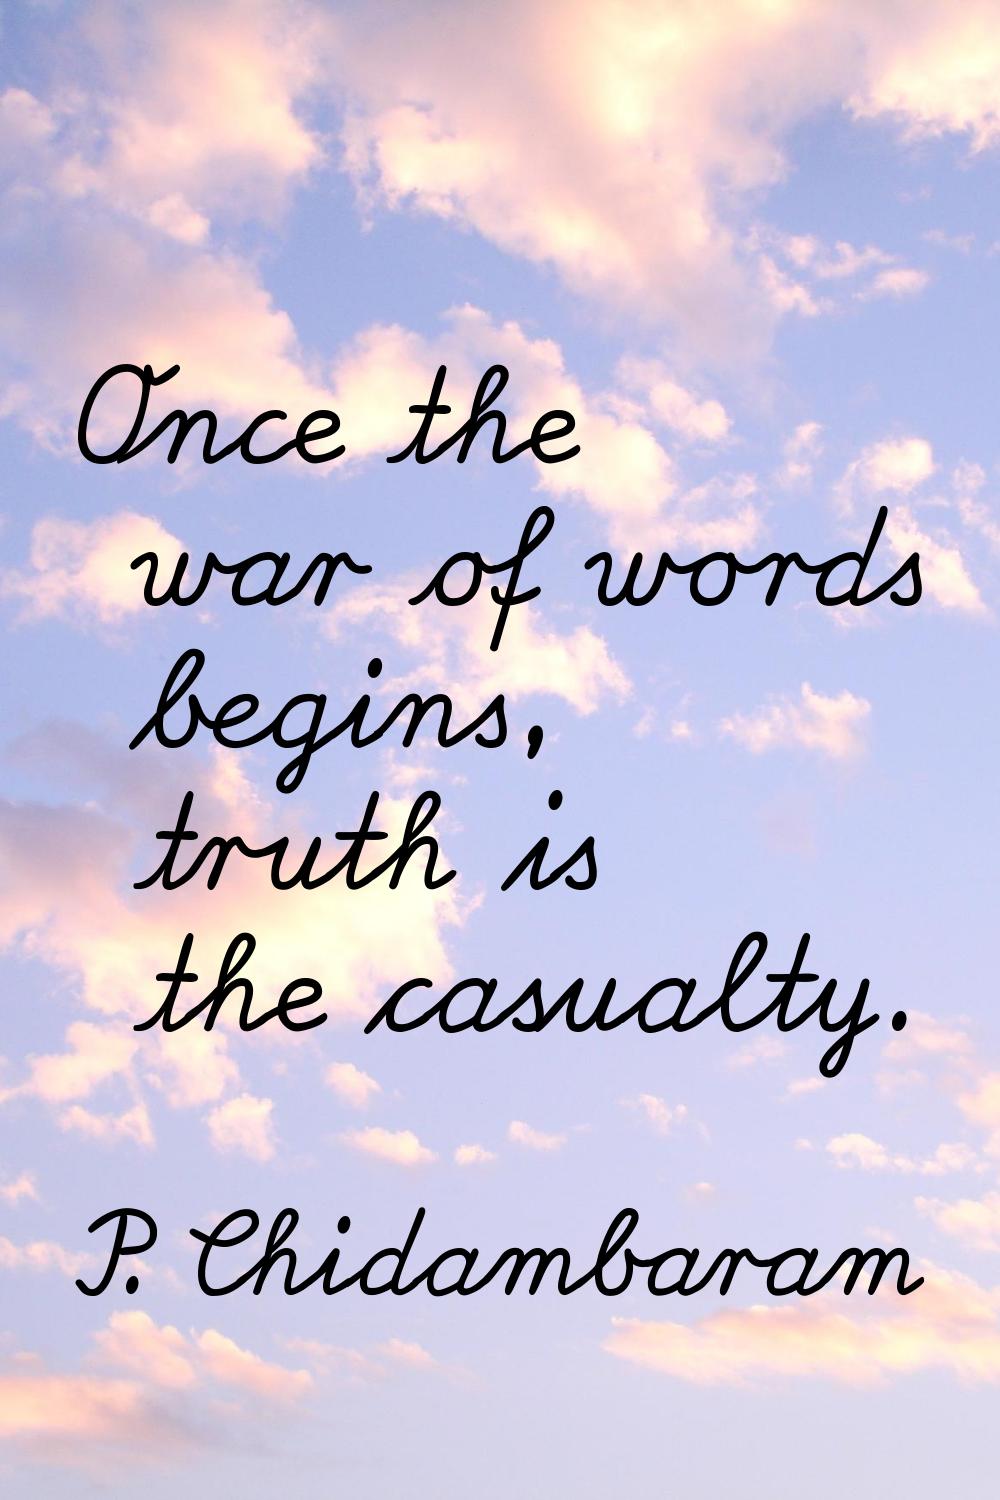 Once the war of words begins, truth is the casualty.